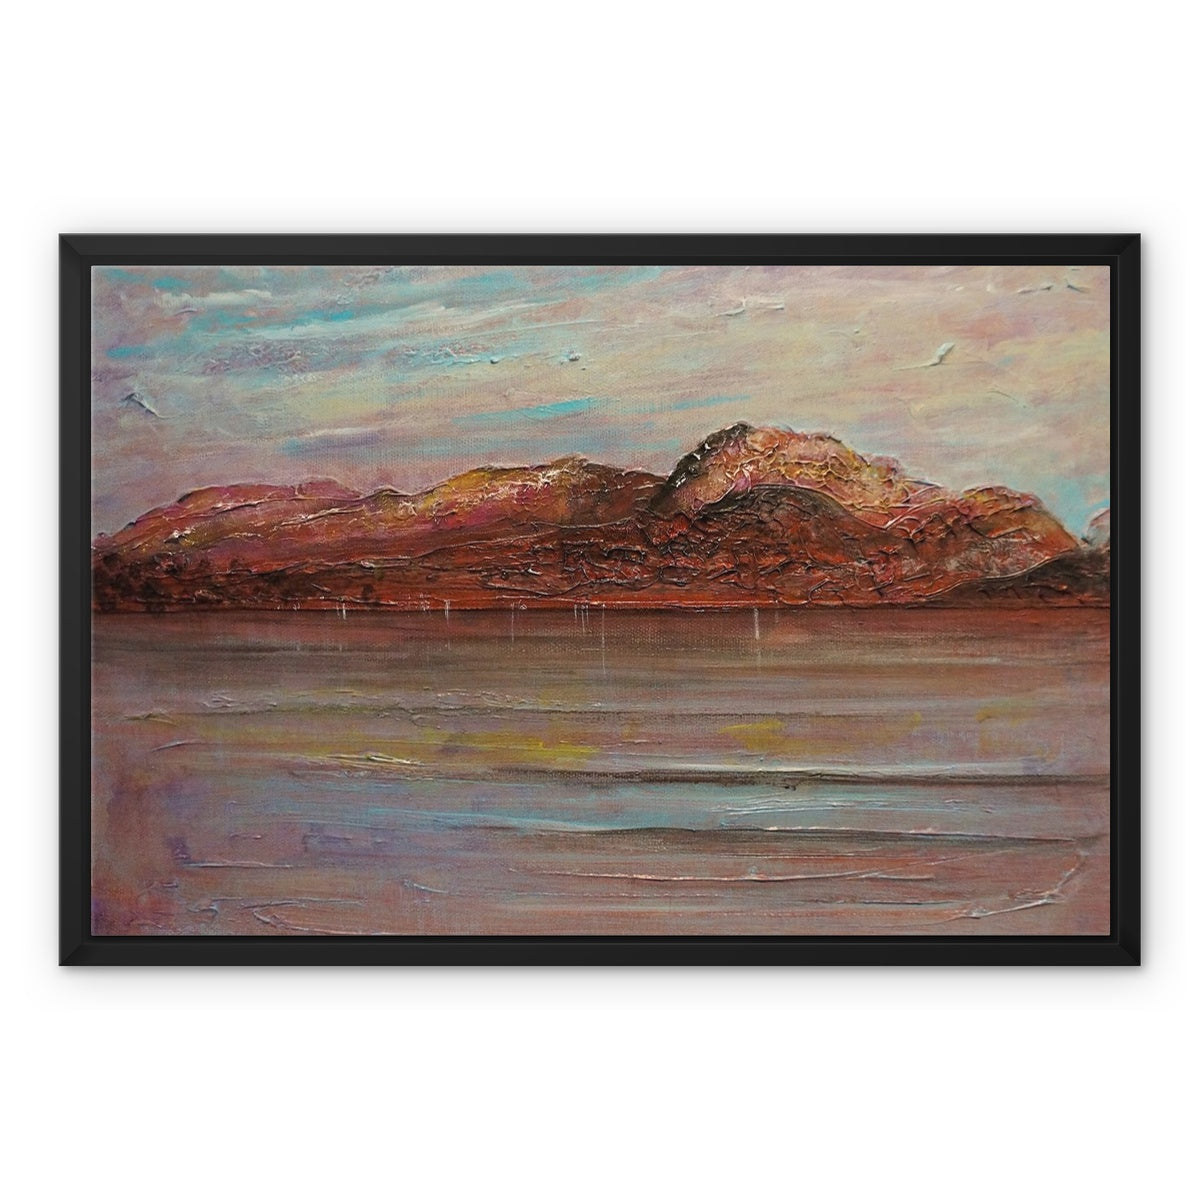 Ben Nevis Painting | Framed Canvas-Floating Framed Canvas Prints-Scottish Lochs & Mountains Art Gallery-24"x18"-Black Frame-White Wrap-Paintings, Prints, Homeware, Art Gifts From Scotland By Scottish Artist Kevin Hunter